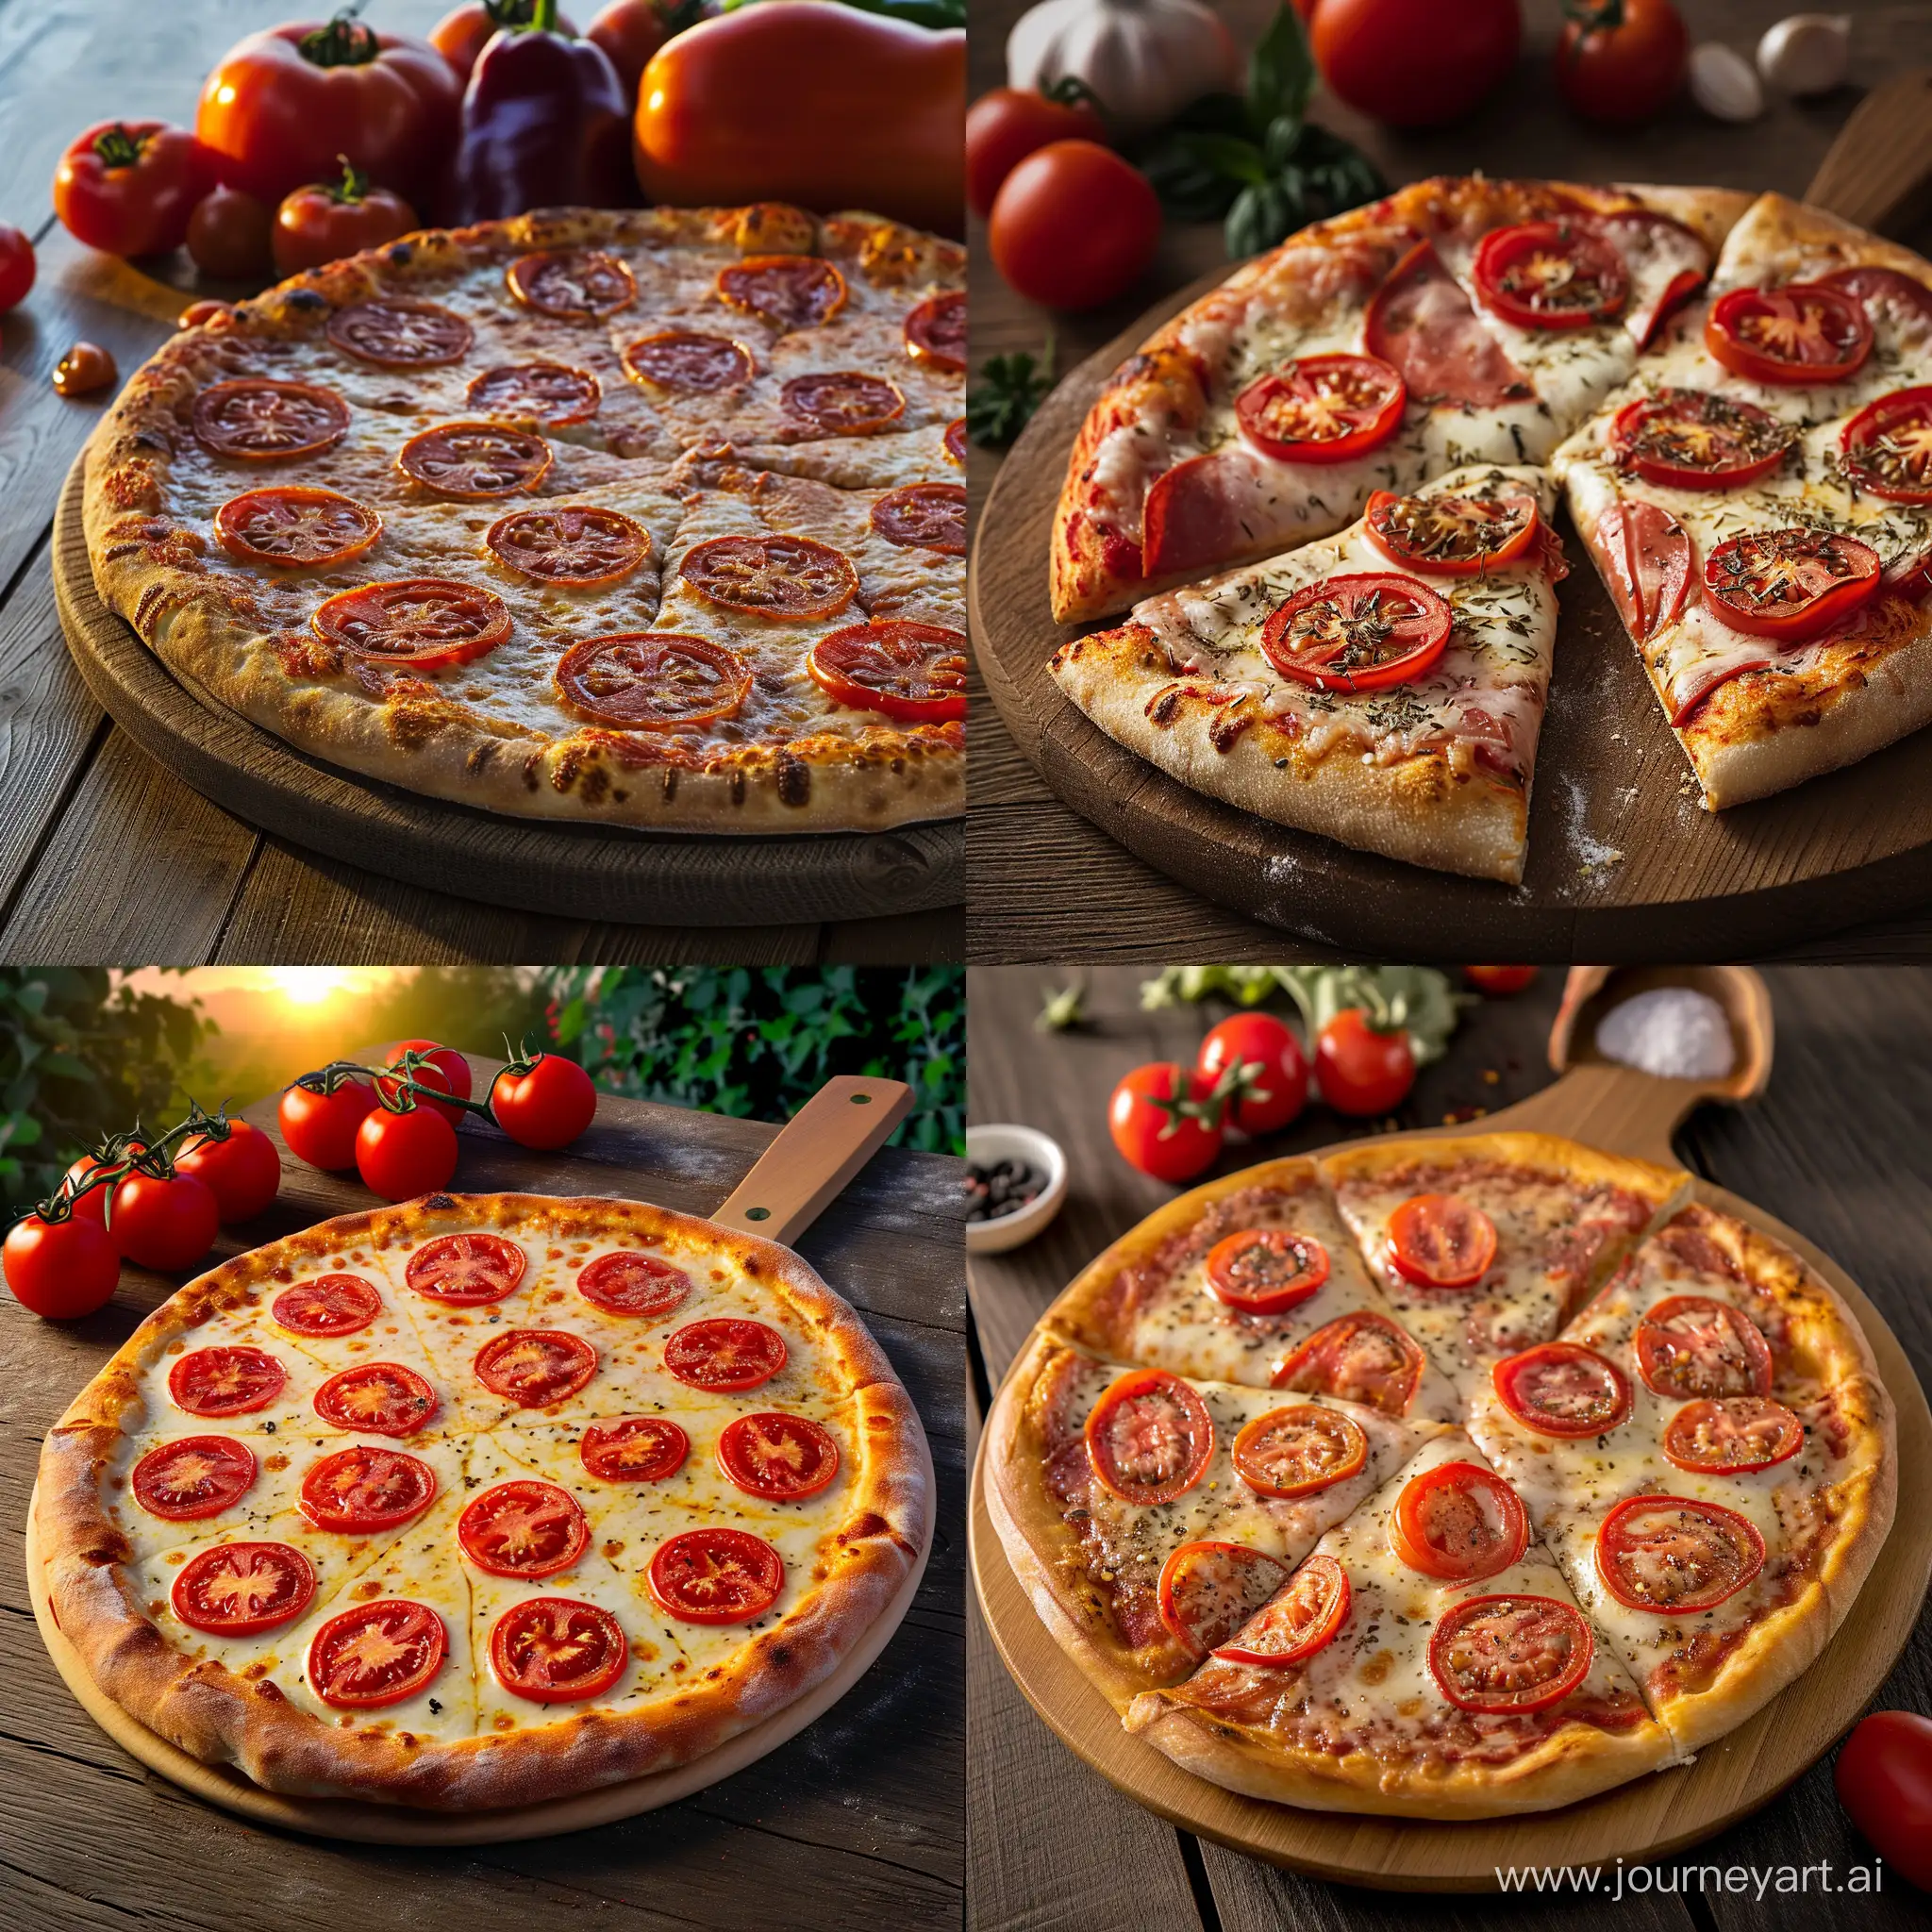 Vibrant-Sunset-Pizza-with-Fresh-Tomato-in-High-Definition-HD-8K-Resolution